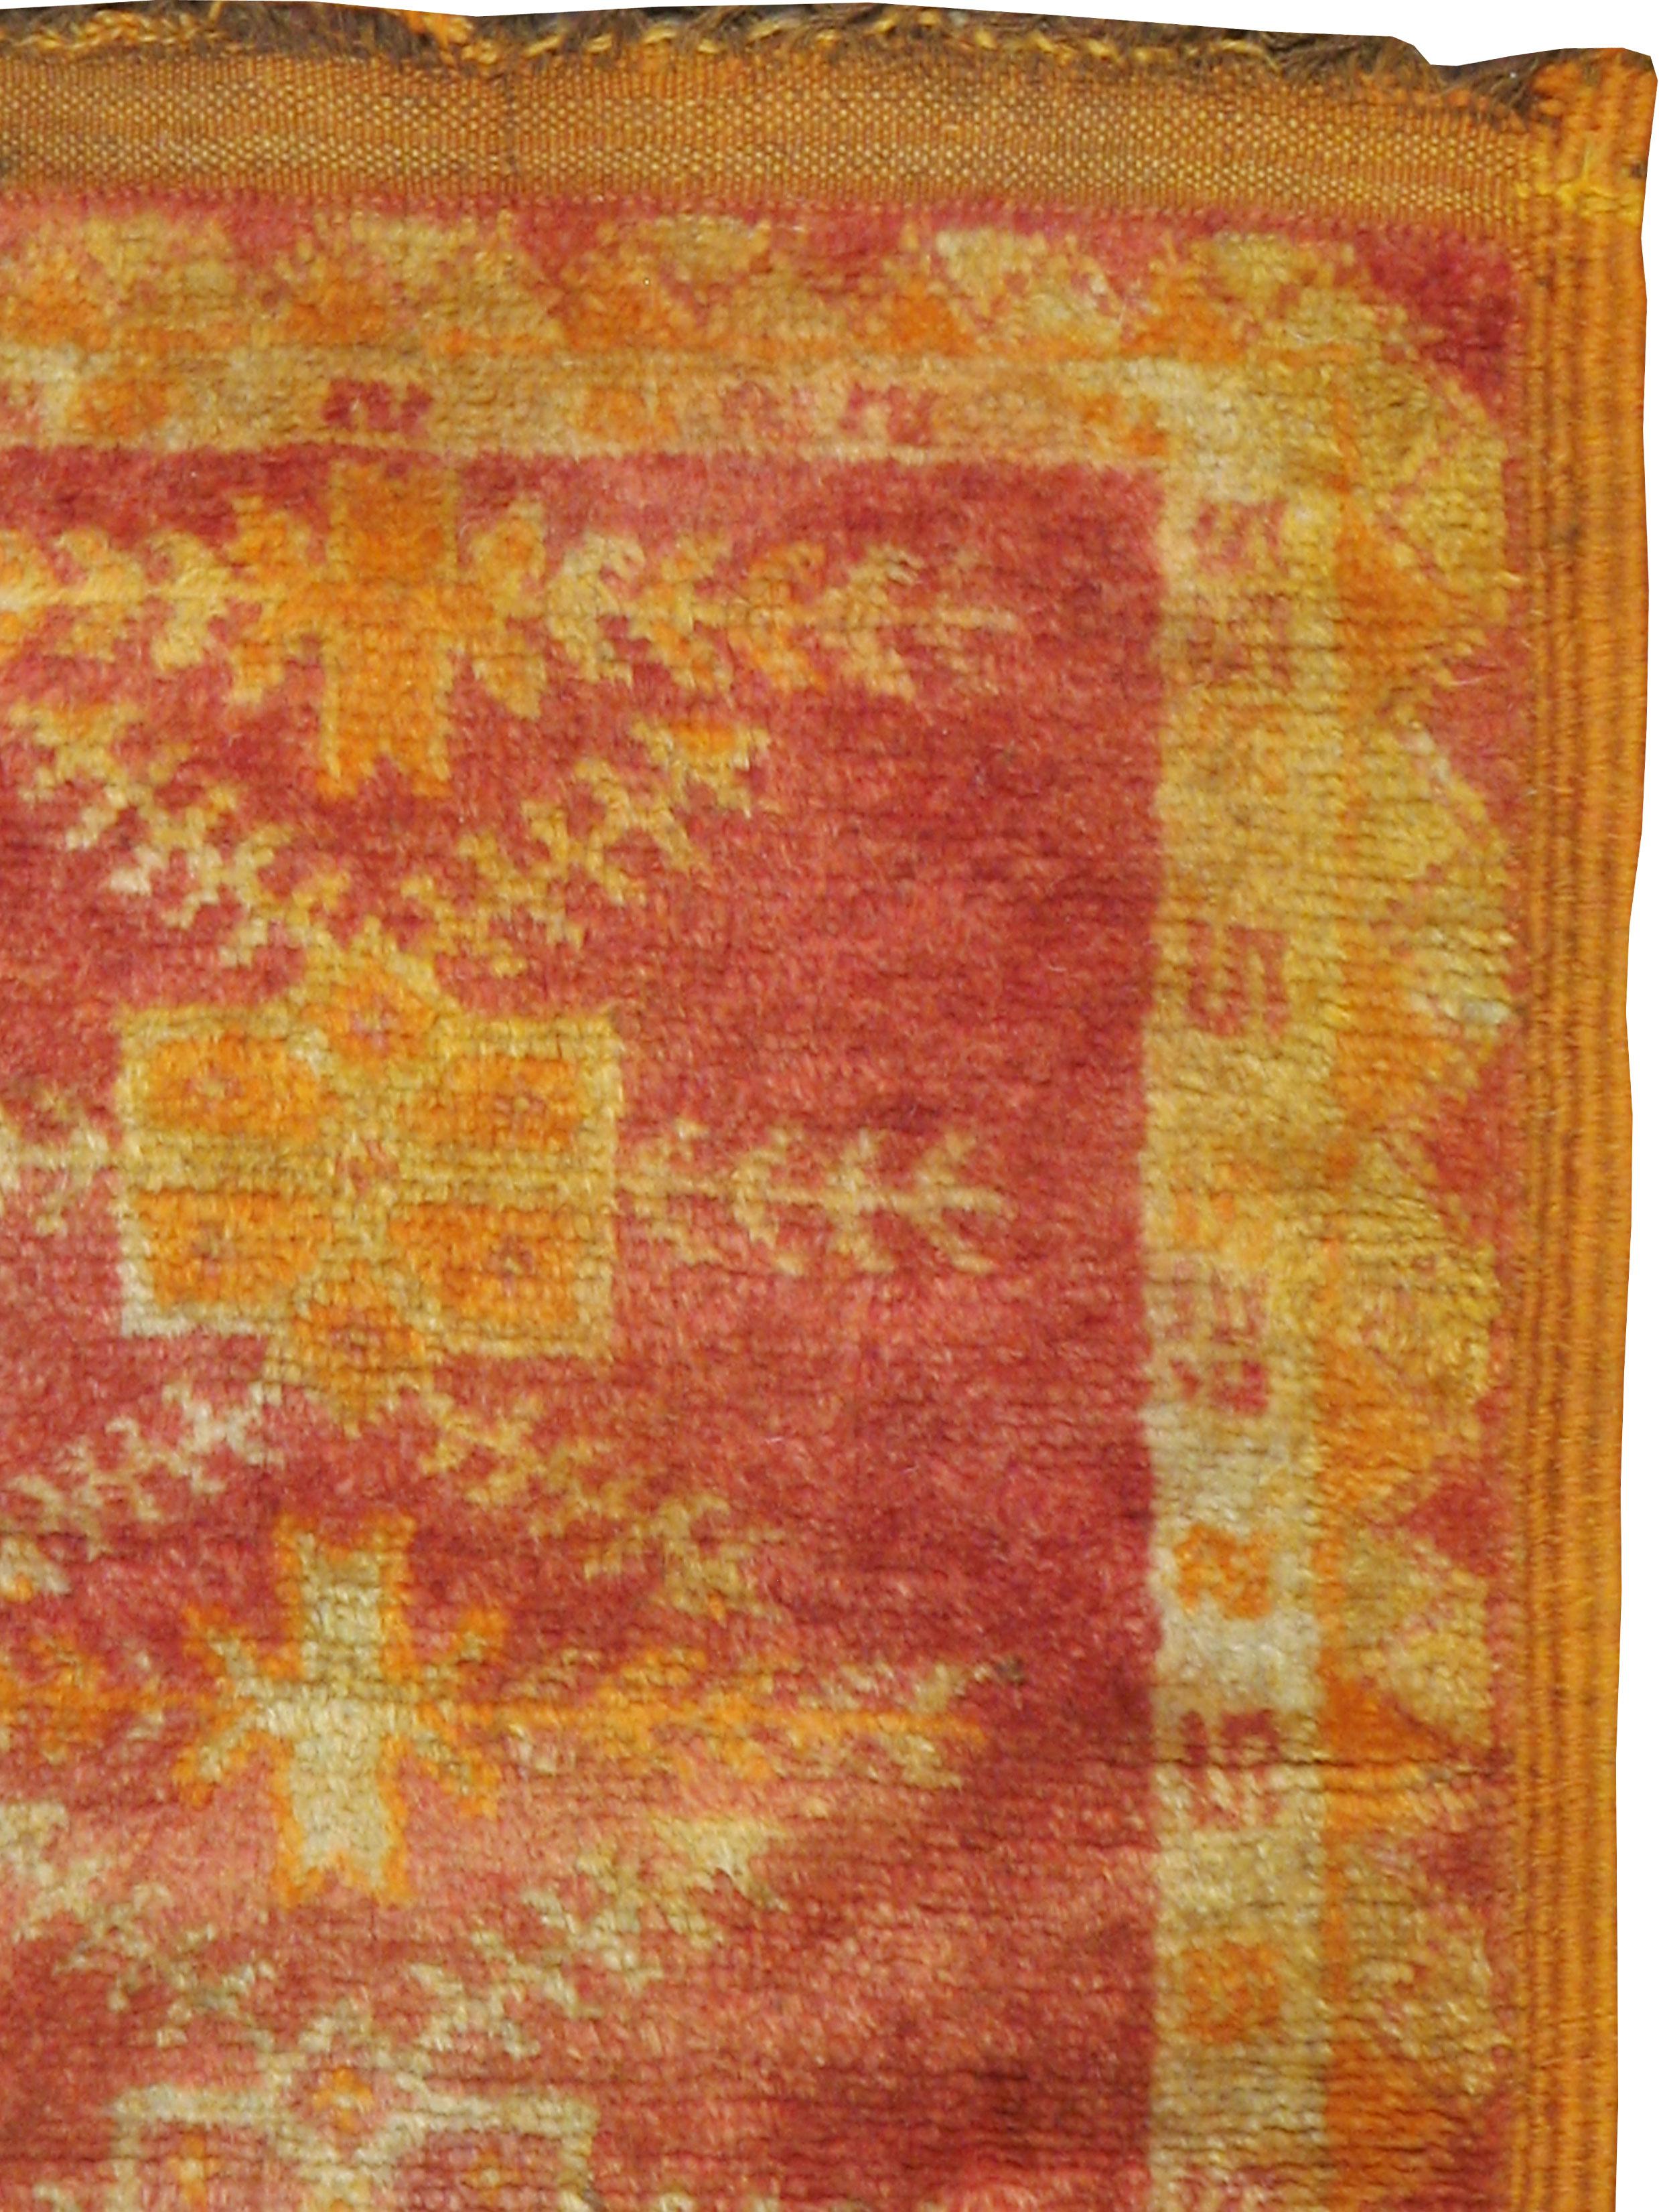 A vintage Moroccan rug from the late 20th century.